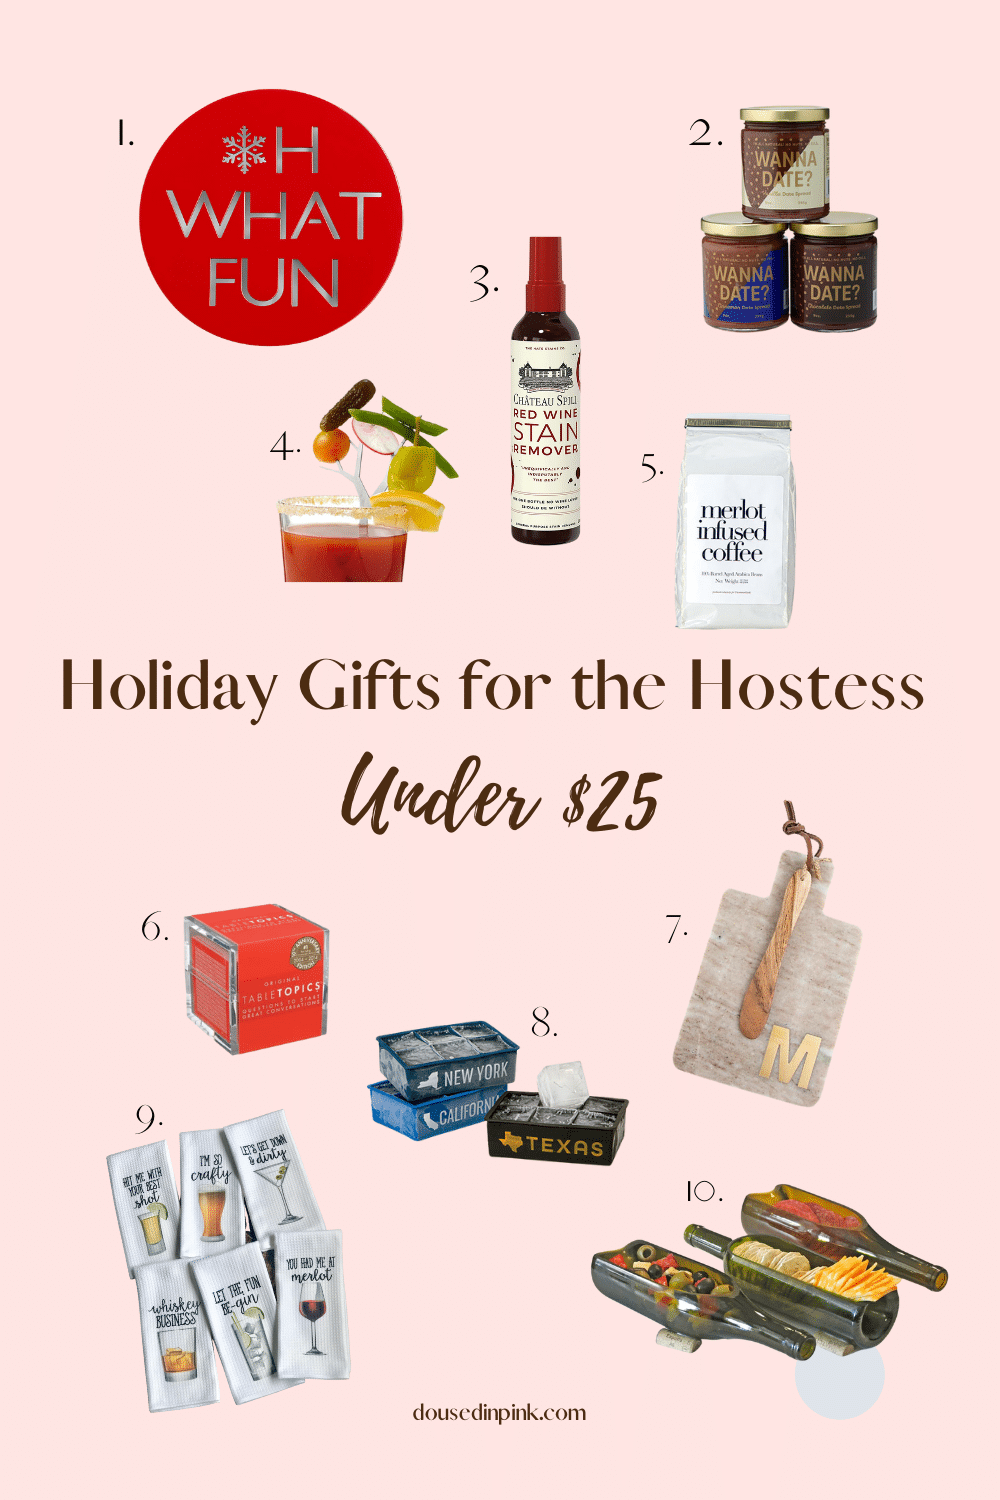 Holiday Gifts for the Hostess Under $25